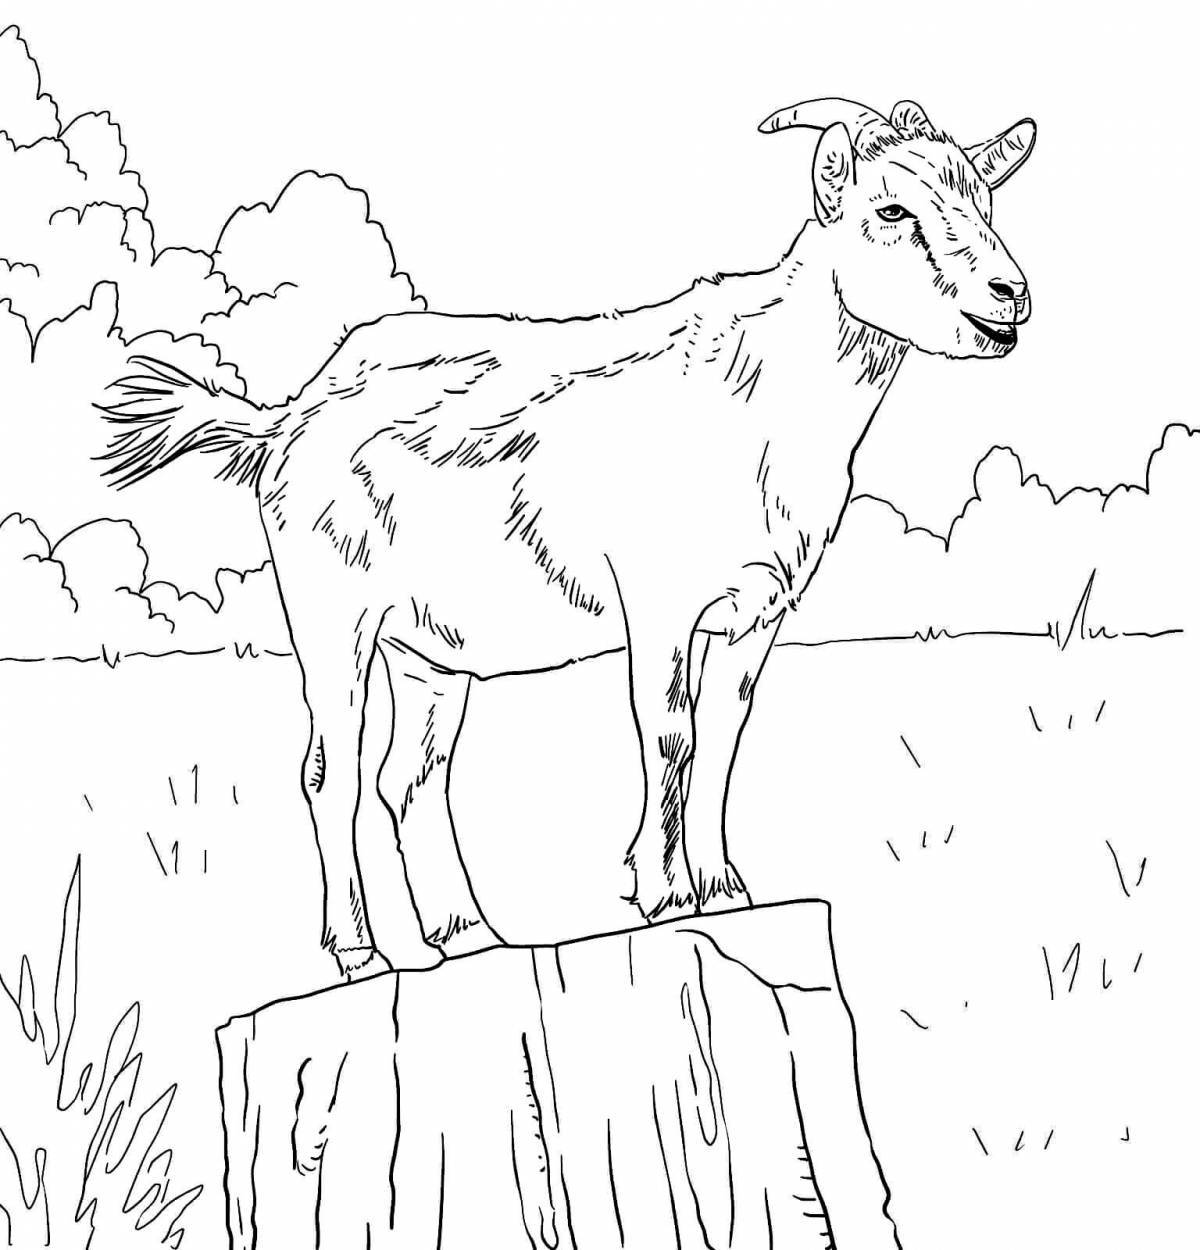 Live goat coloring for kids